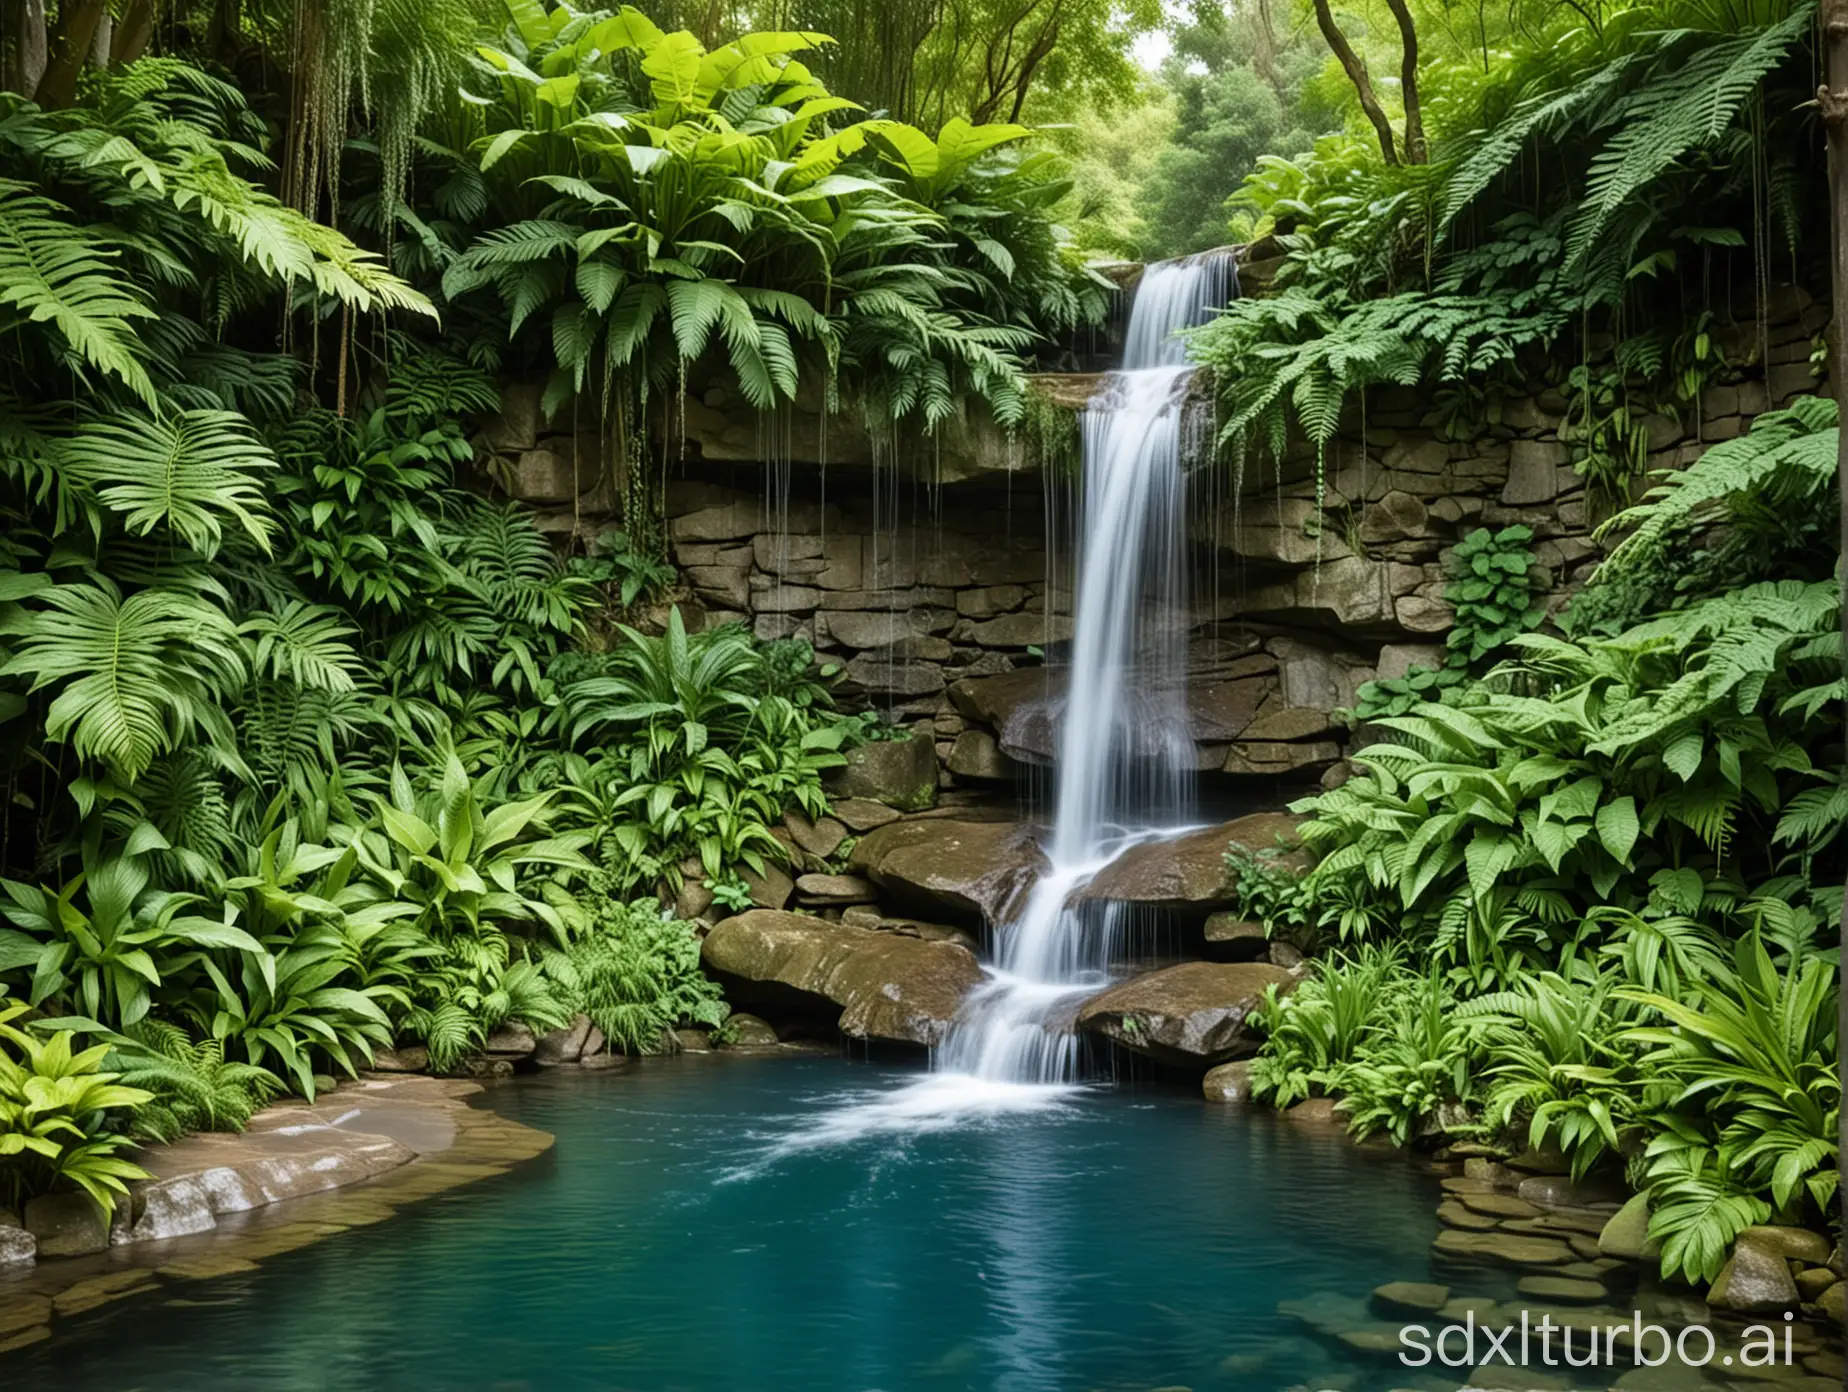 Serene-Waterfall-Amidst-Lush-Greenery-Natures-Tranquil-Oasis